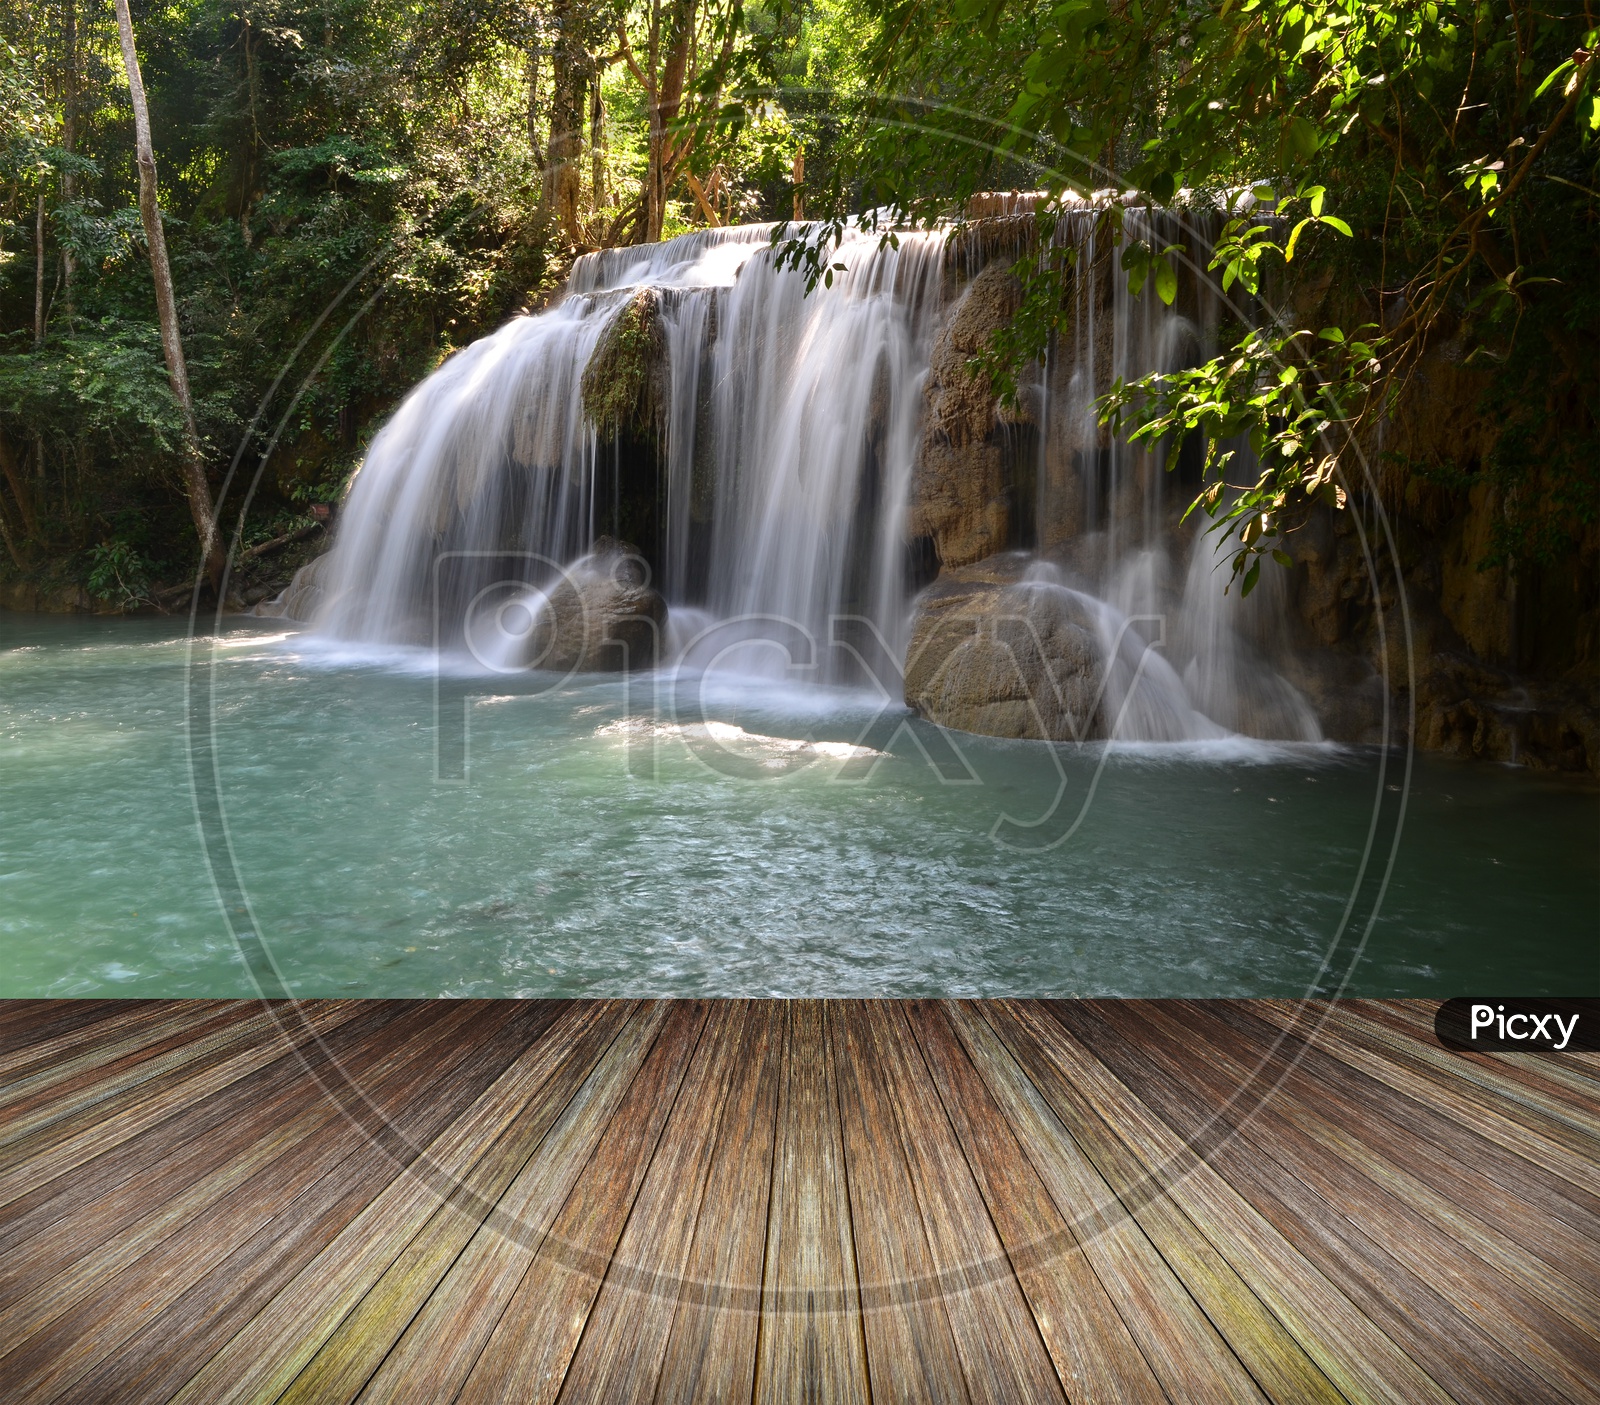 Water Falls in tropical Forest With Wooden Platform